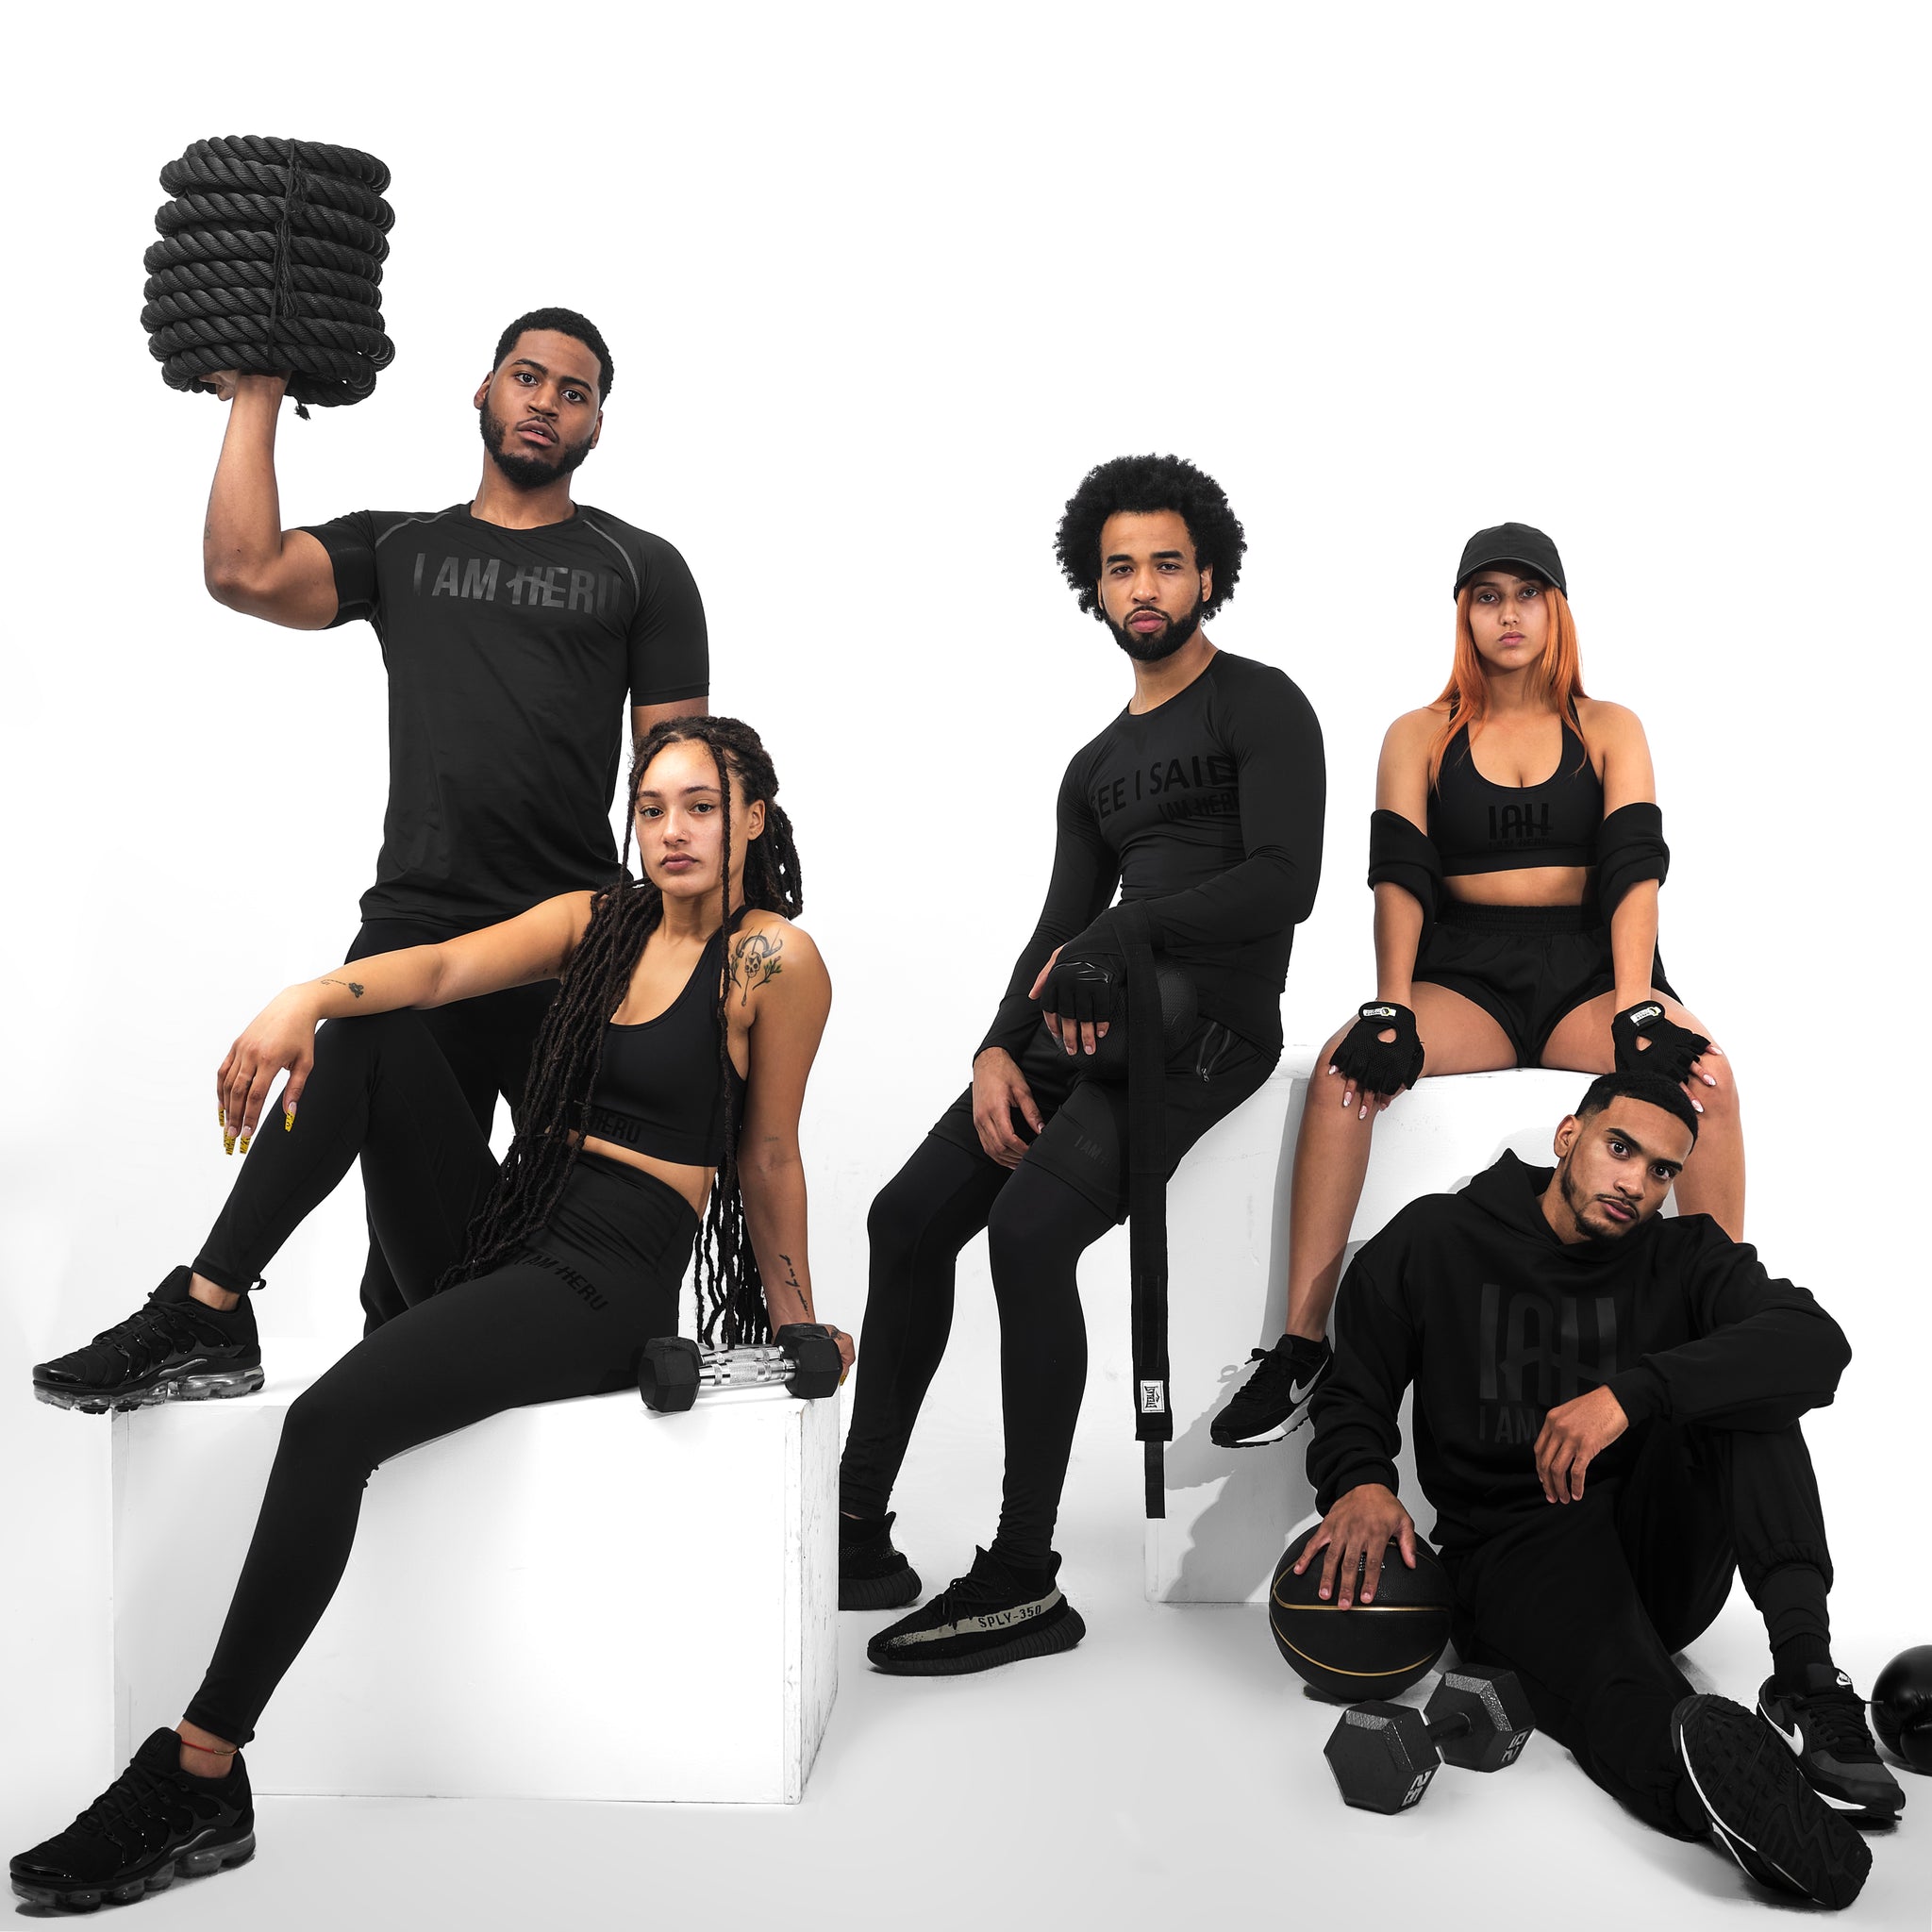 The Athleisure Collection